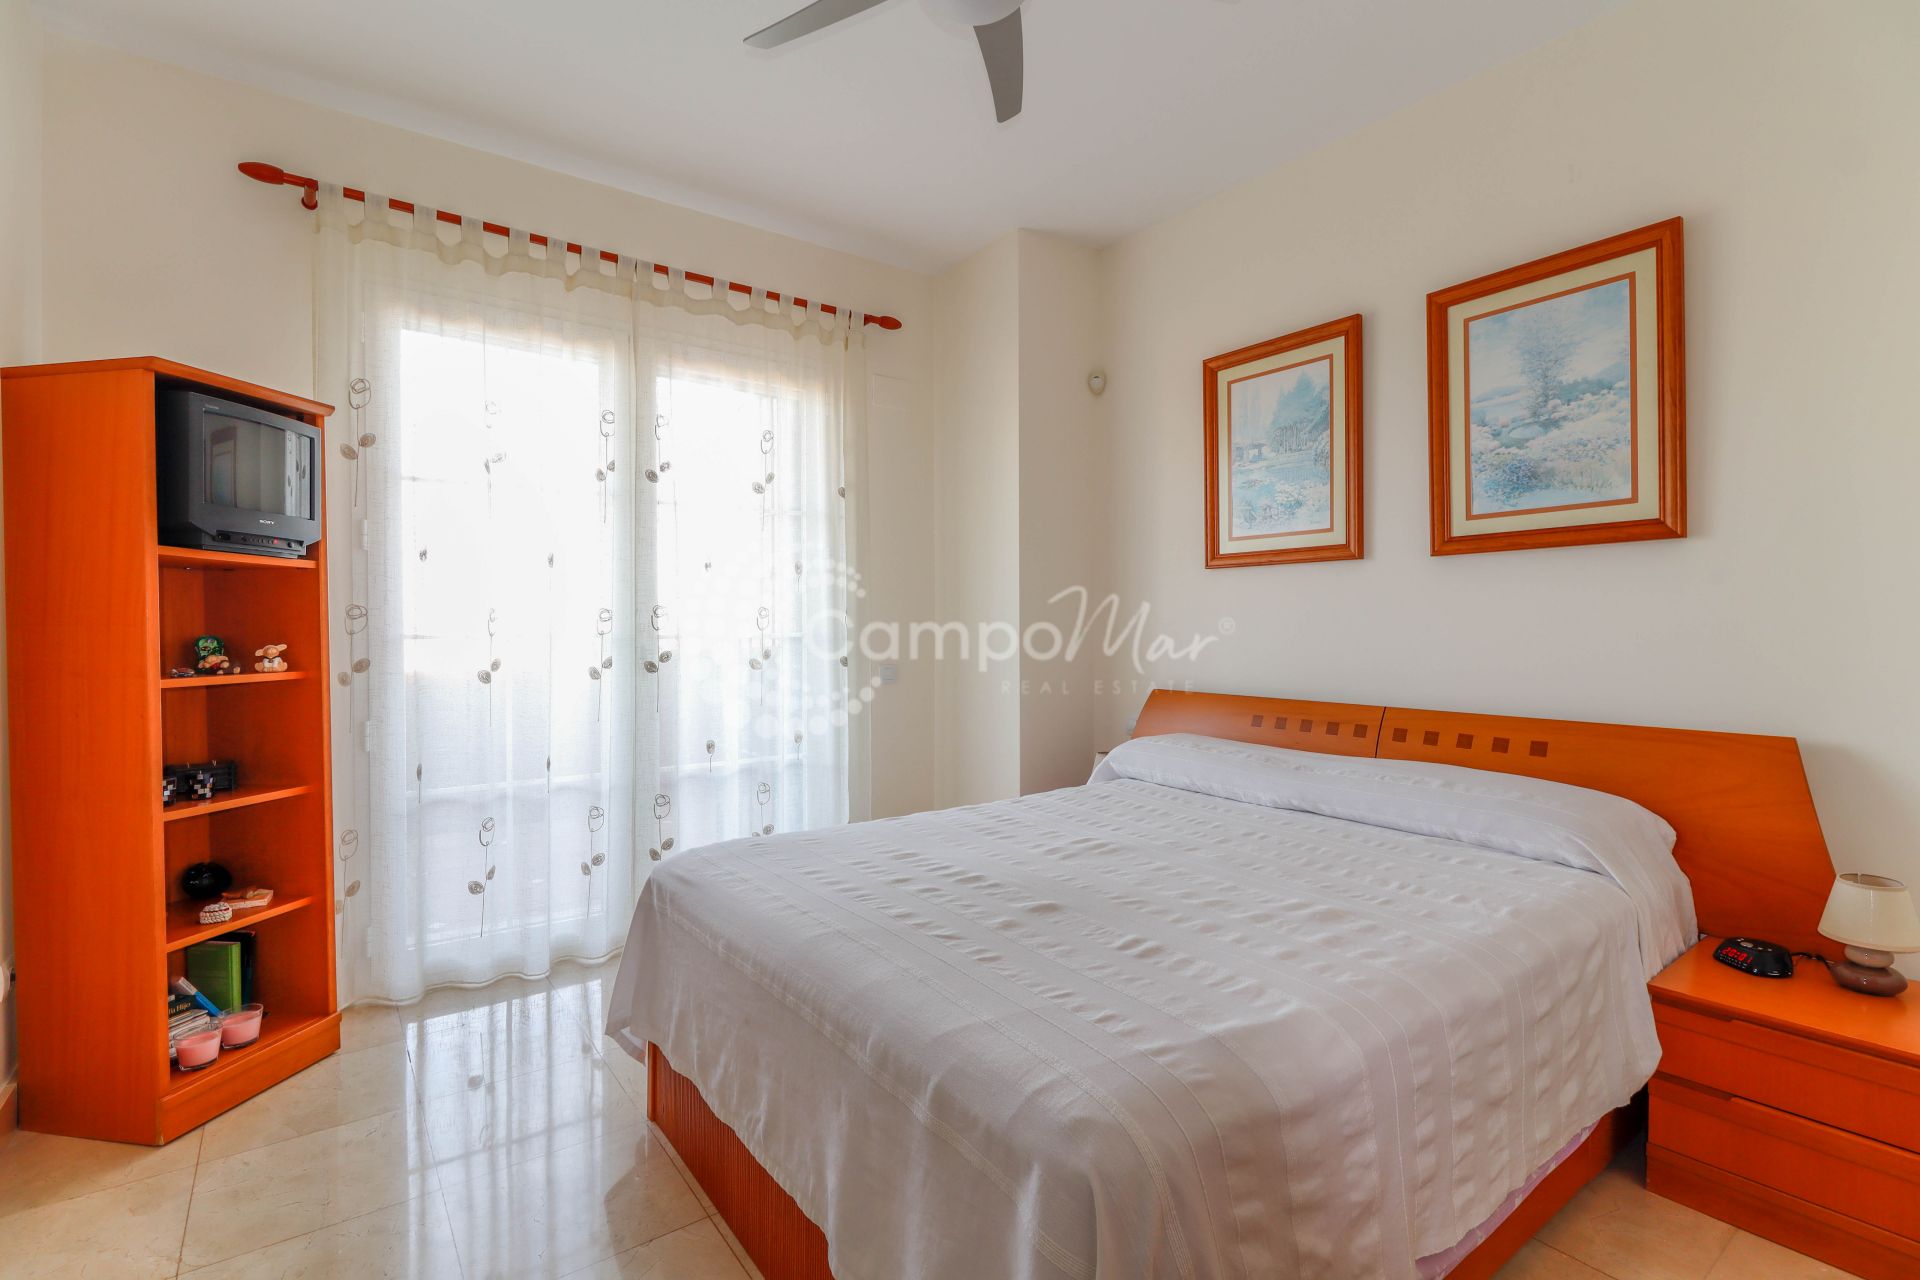 Town House in Seghers, Estepona